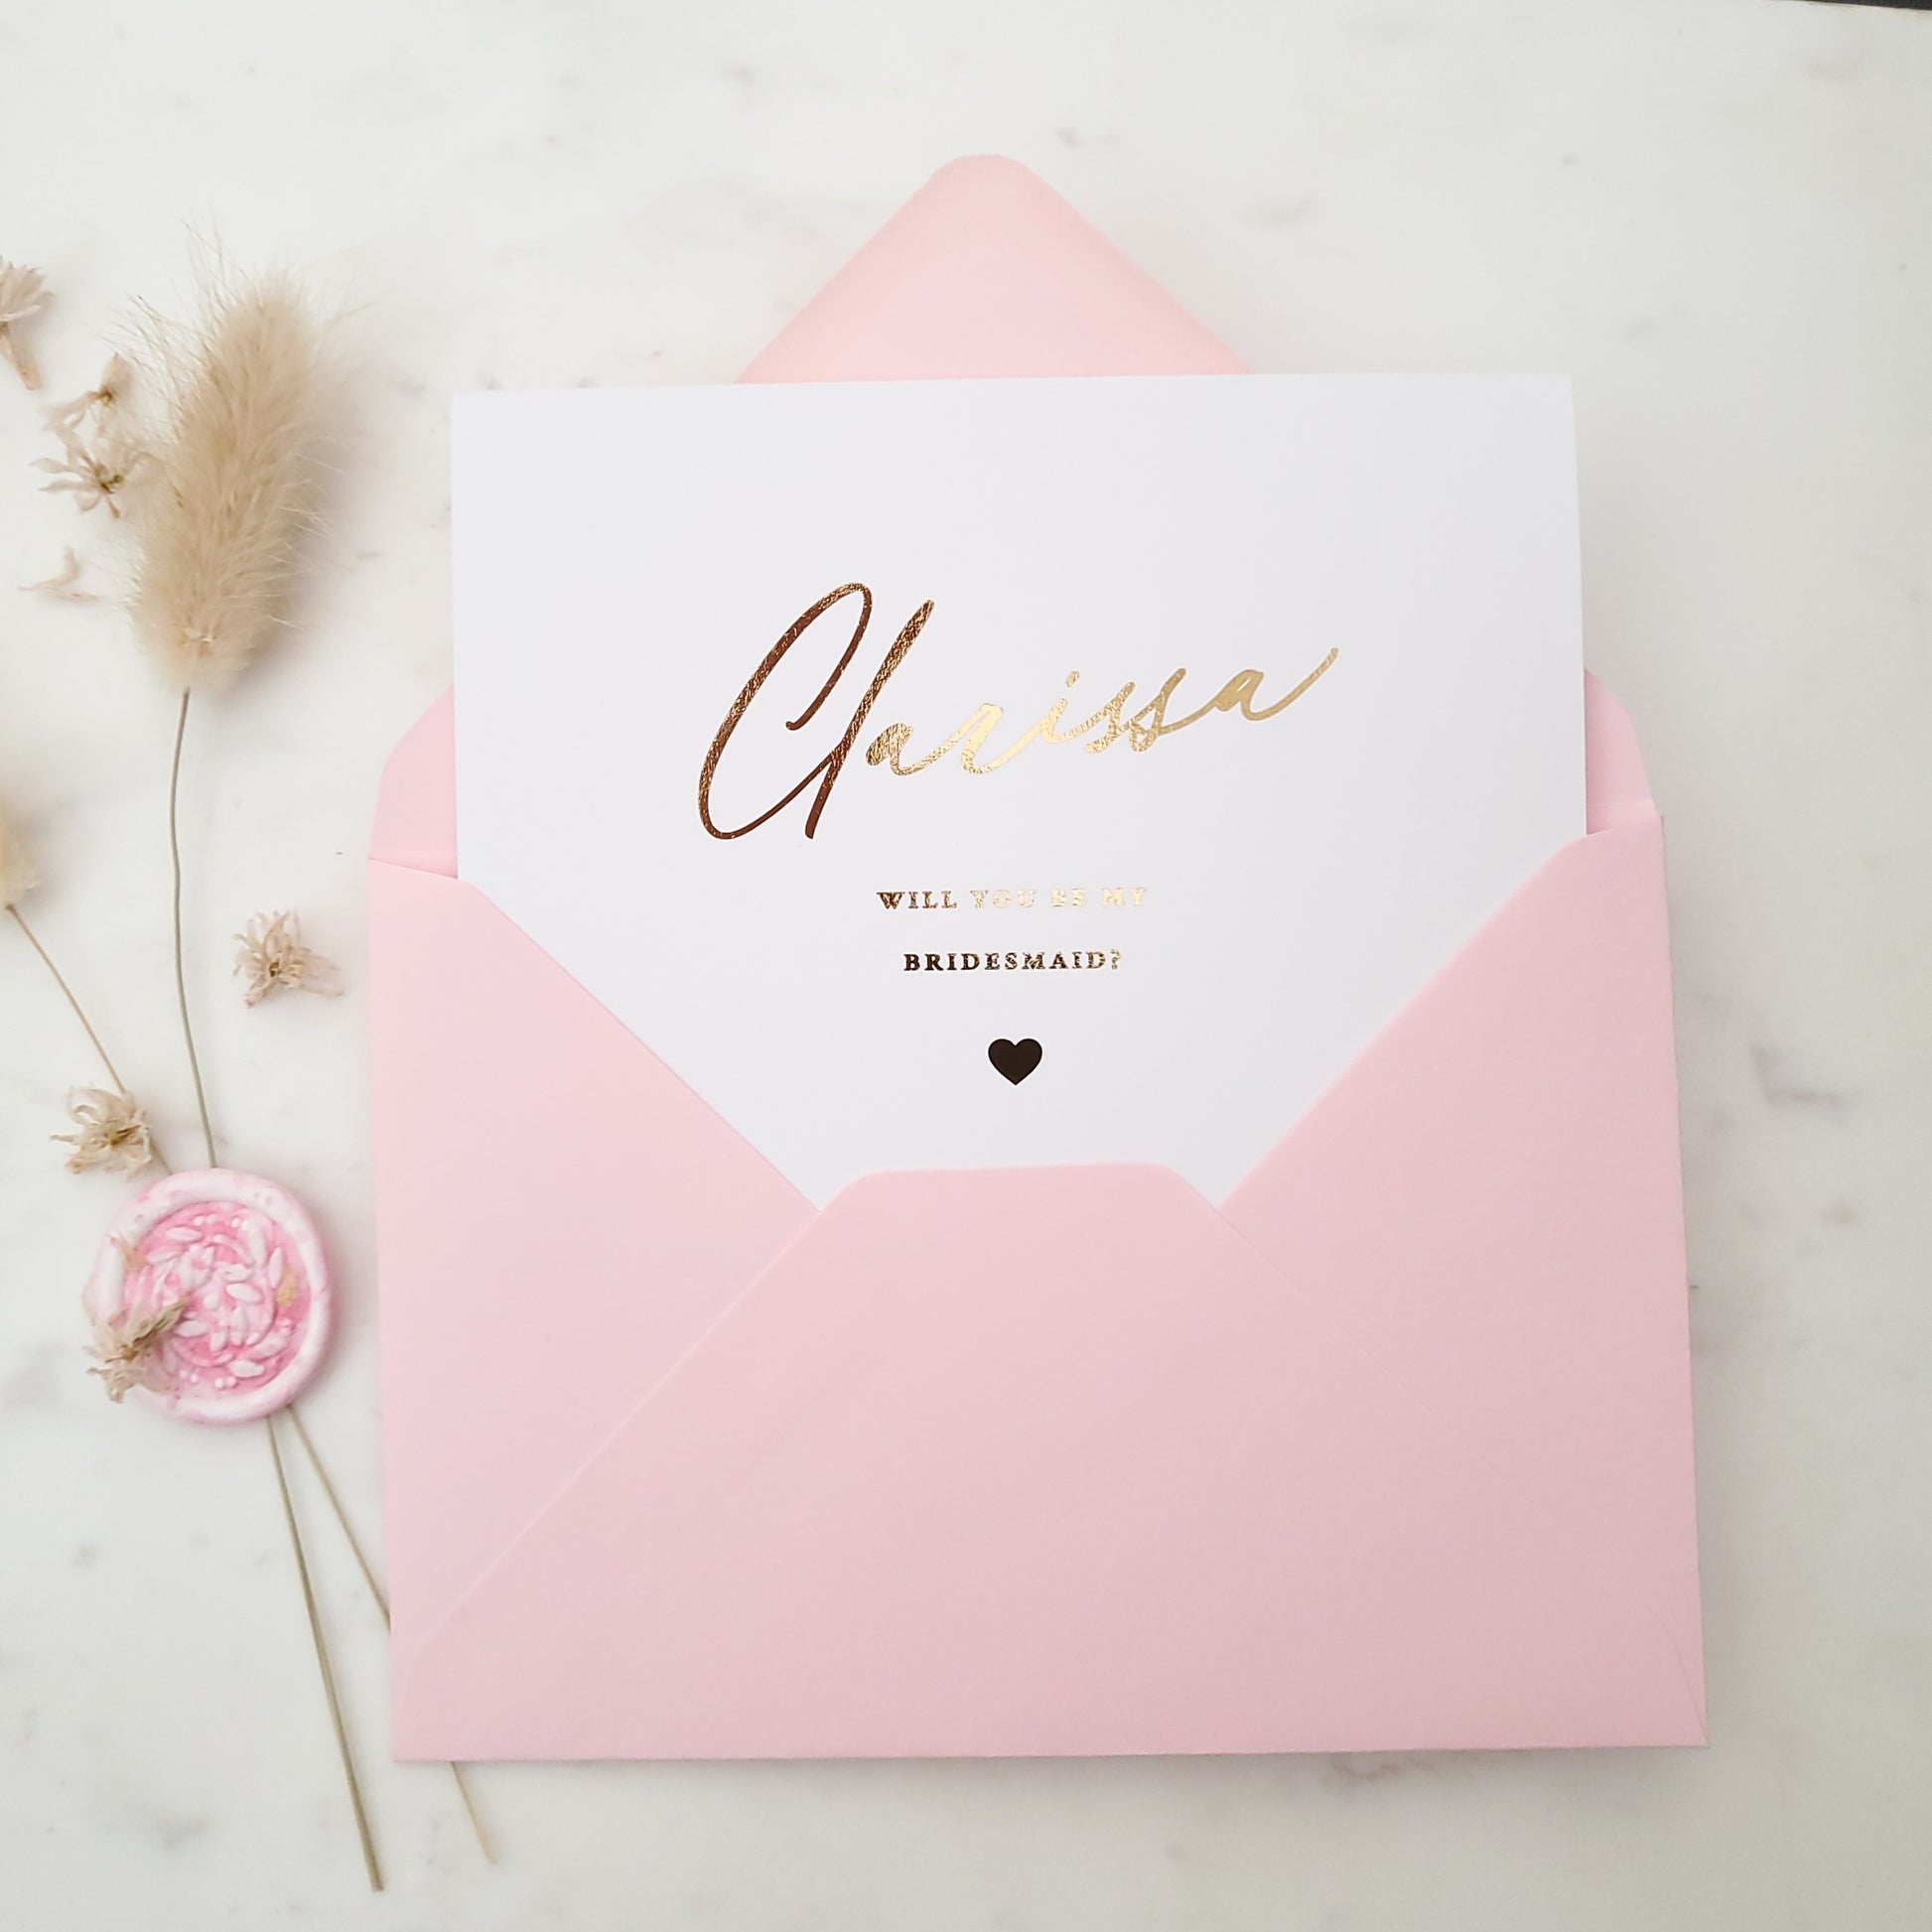 personalized with name bridesmaid proposal card with gold foiled text - XOXOKristen